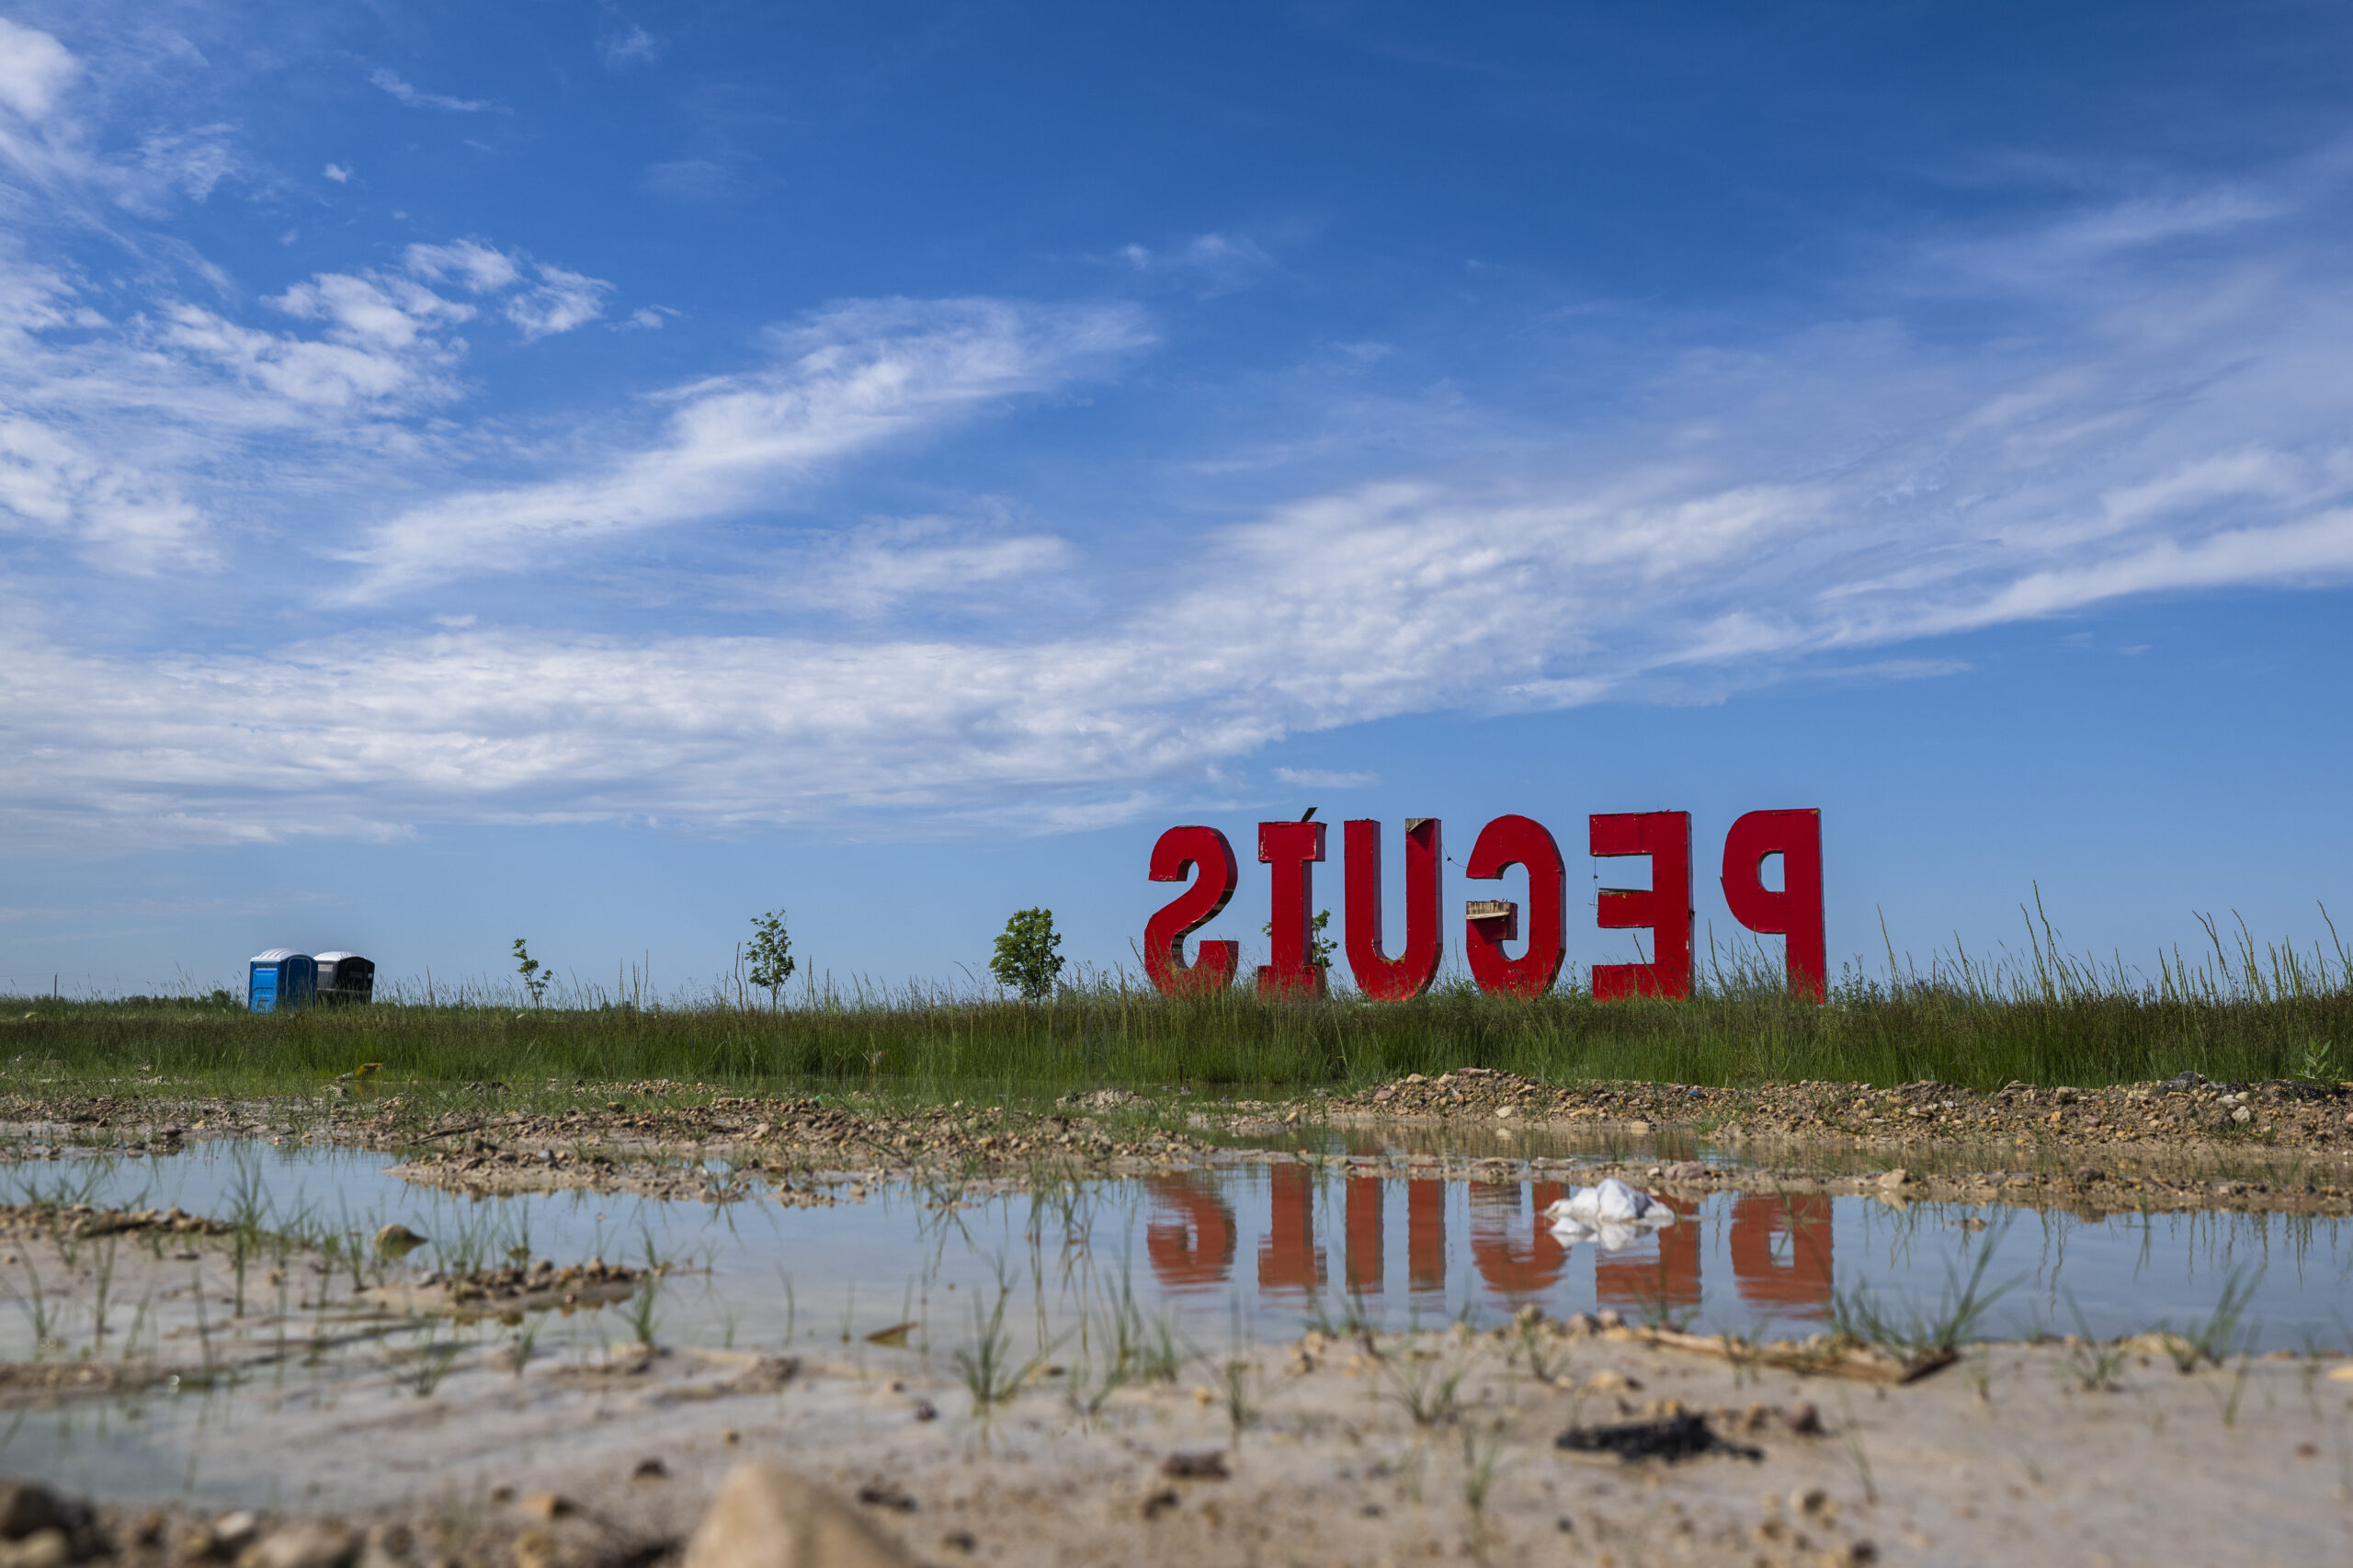 Tall red letters spell Peguis against a blue sky. Shot from behind the sign so the word appears in reverse